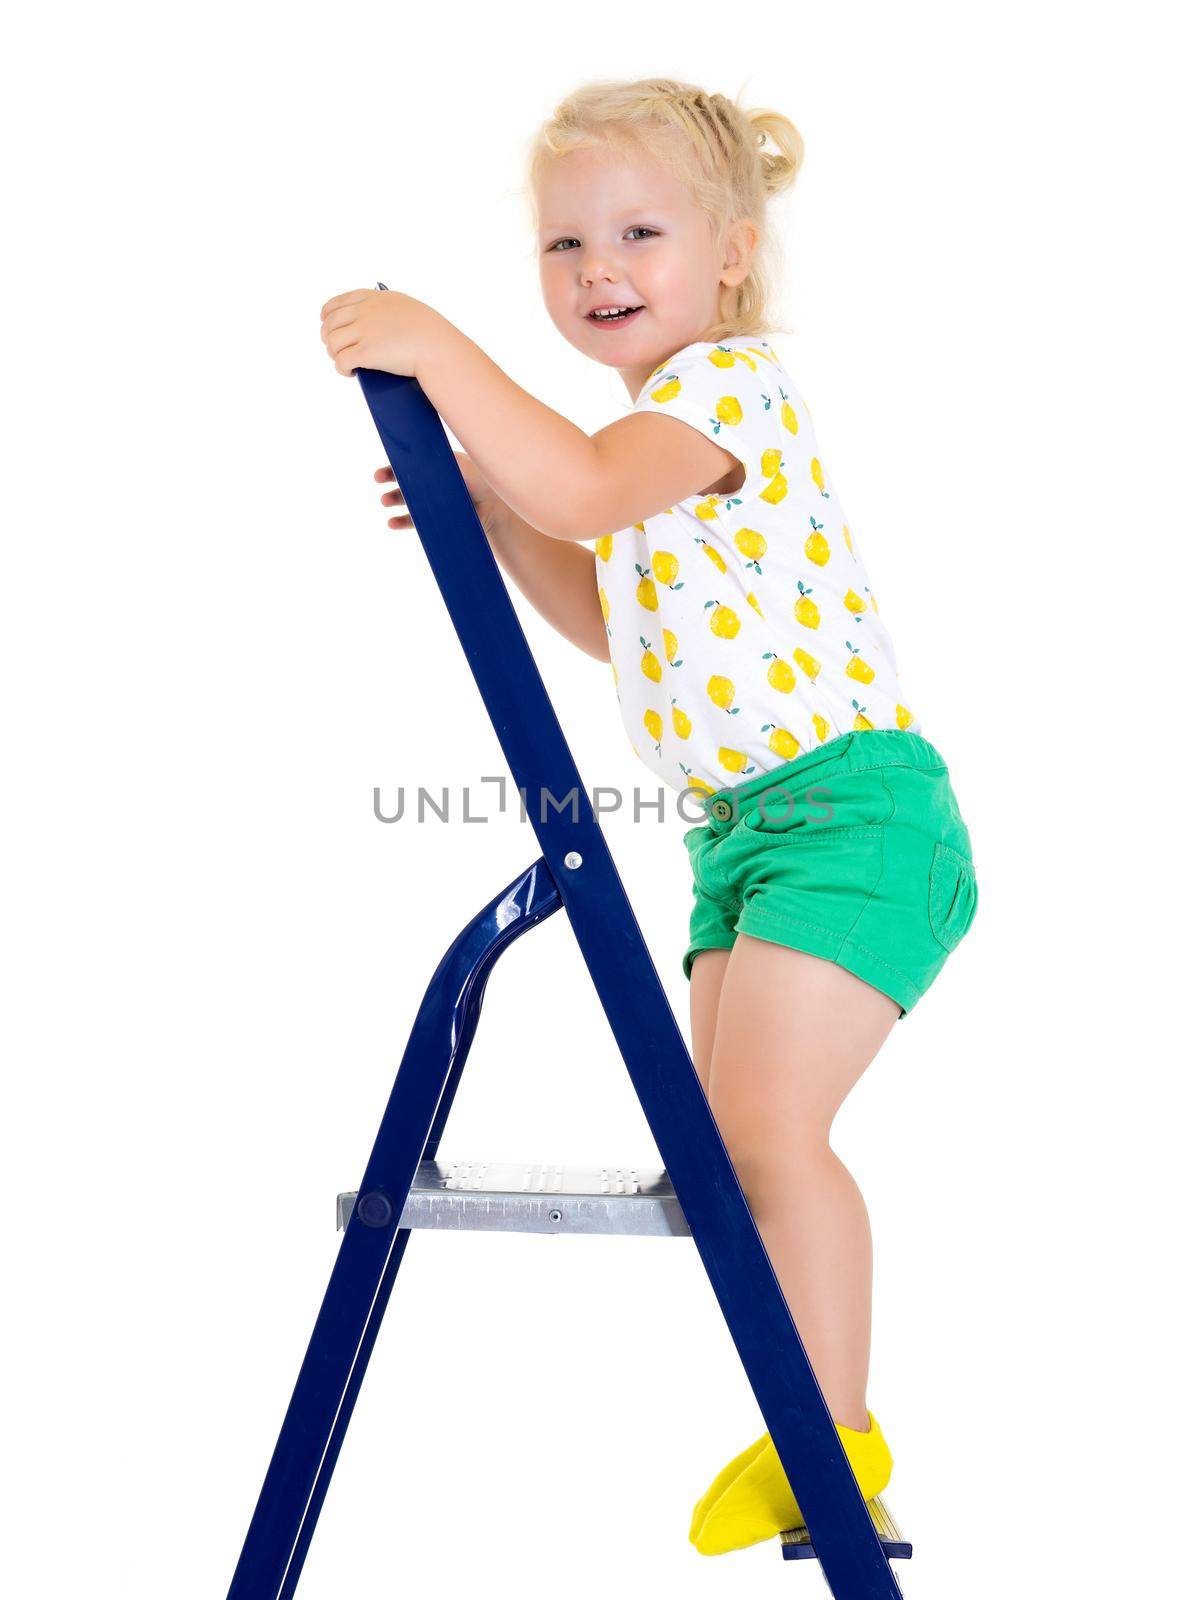 A little girl climbs the ladder. Concept of repair and construction, happy childhood. Isolated on white background.